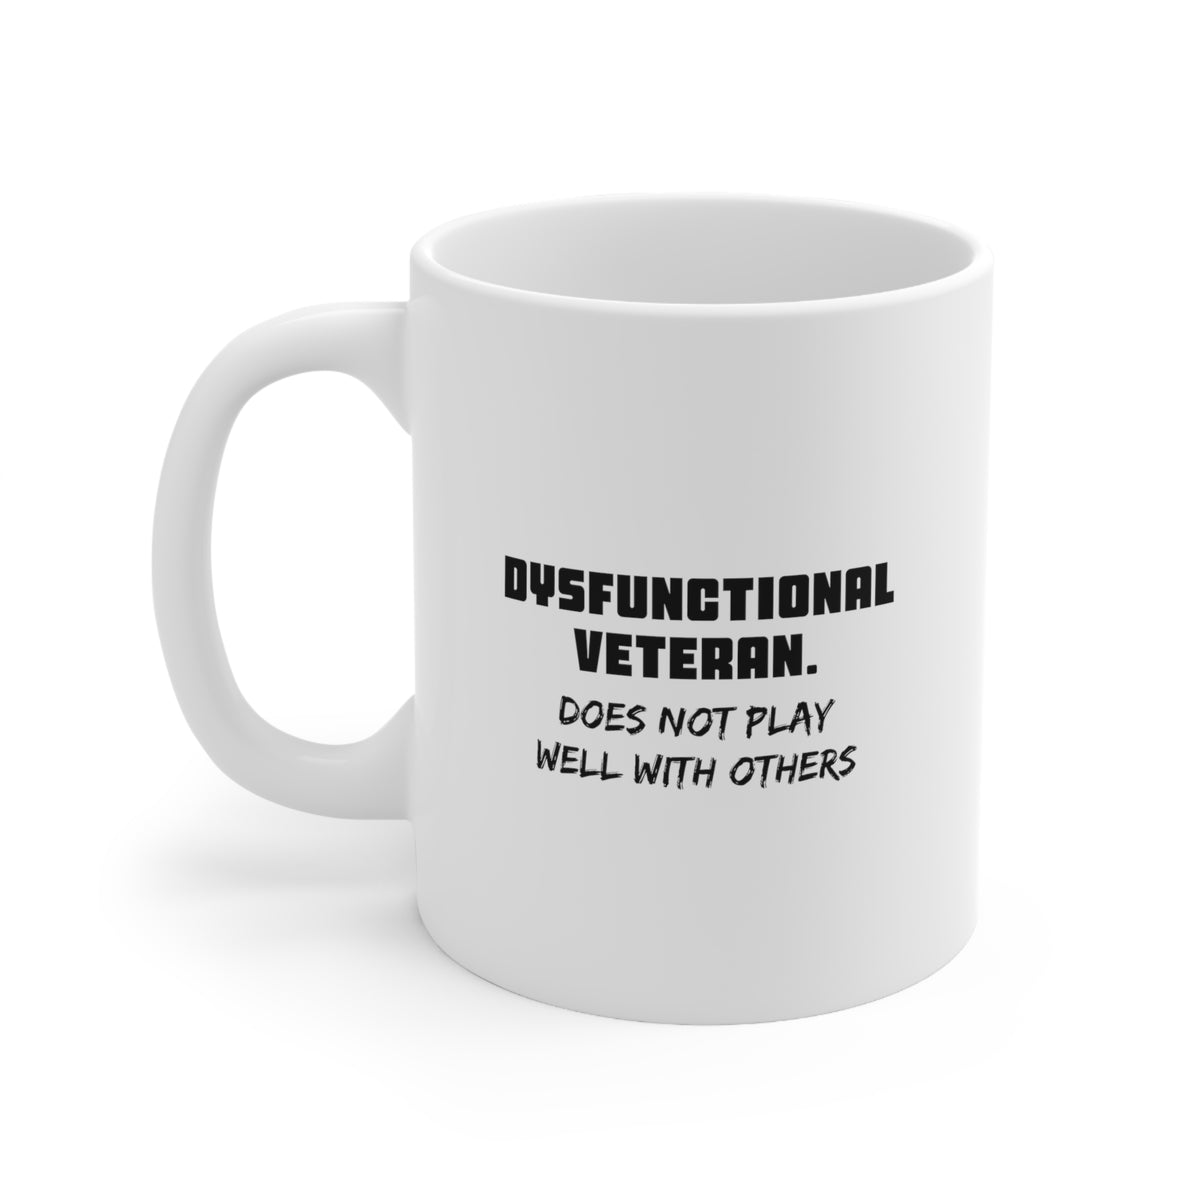 Veteran Gifts - Dysfunctional Veteran. Does Not Play Well With Others – Veteran White Coffee Mug, Tea Cup